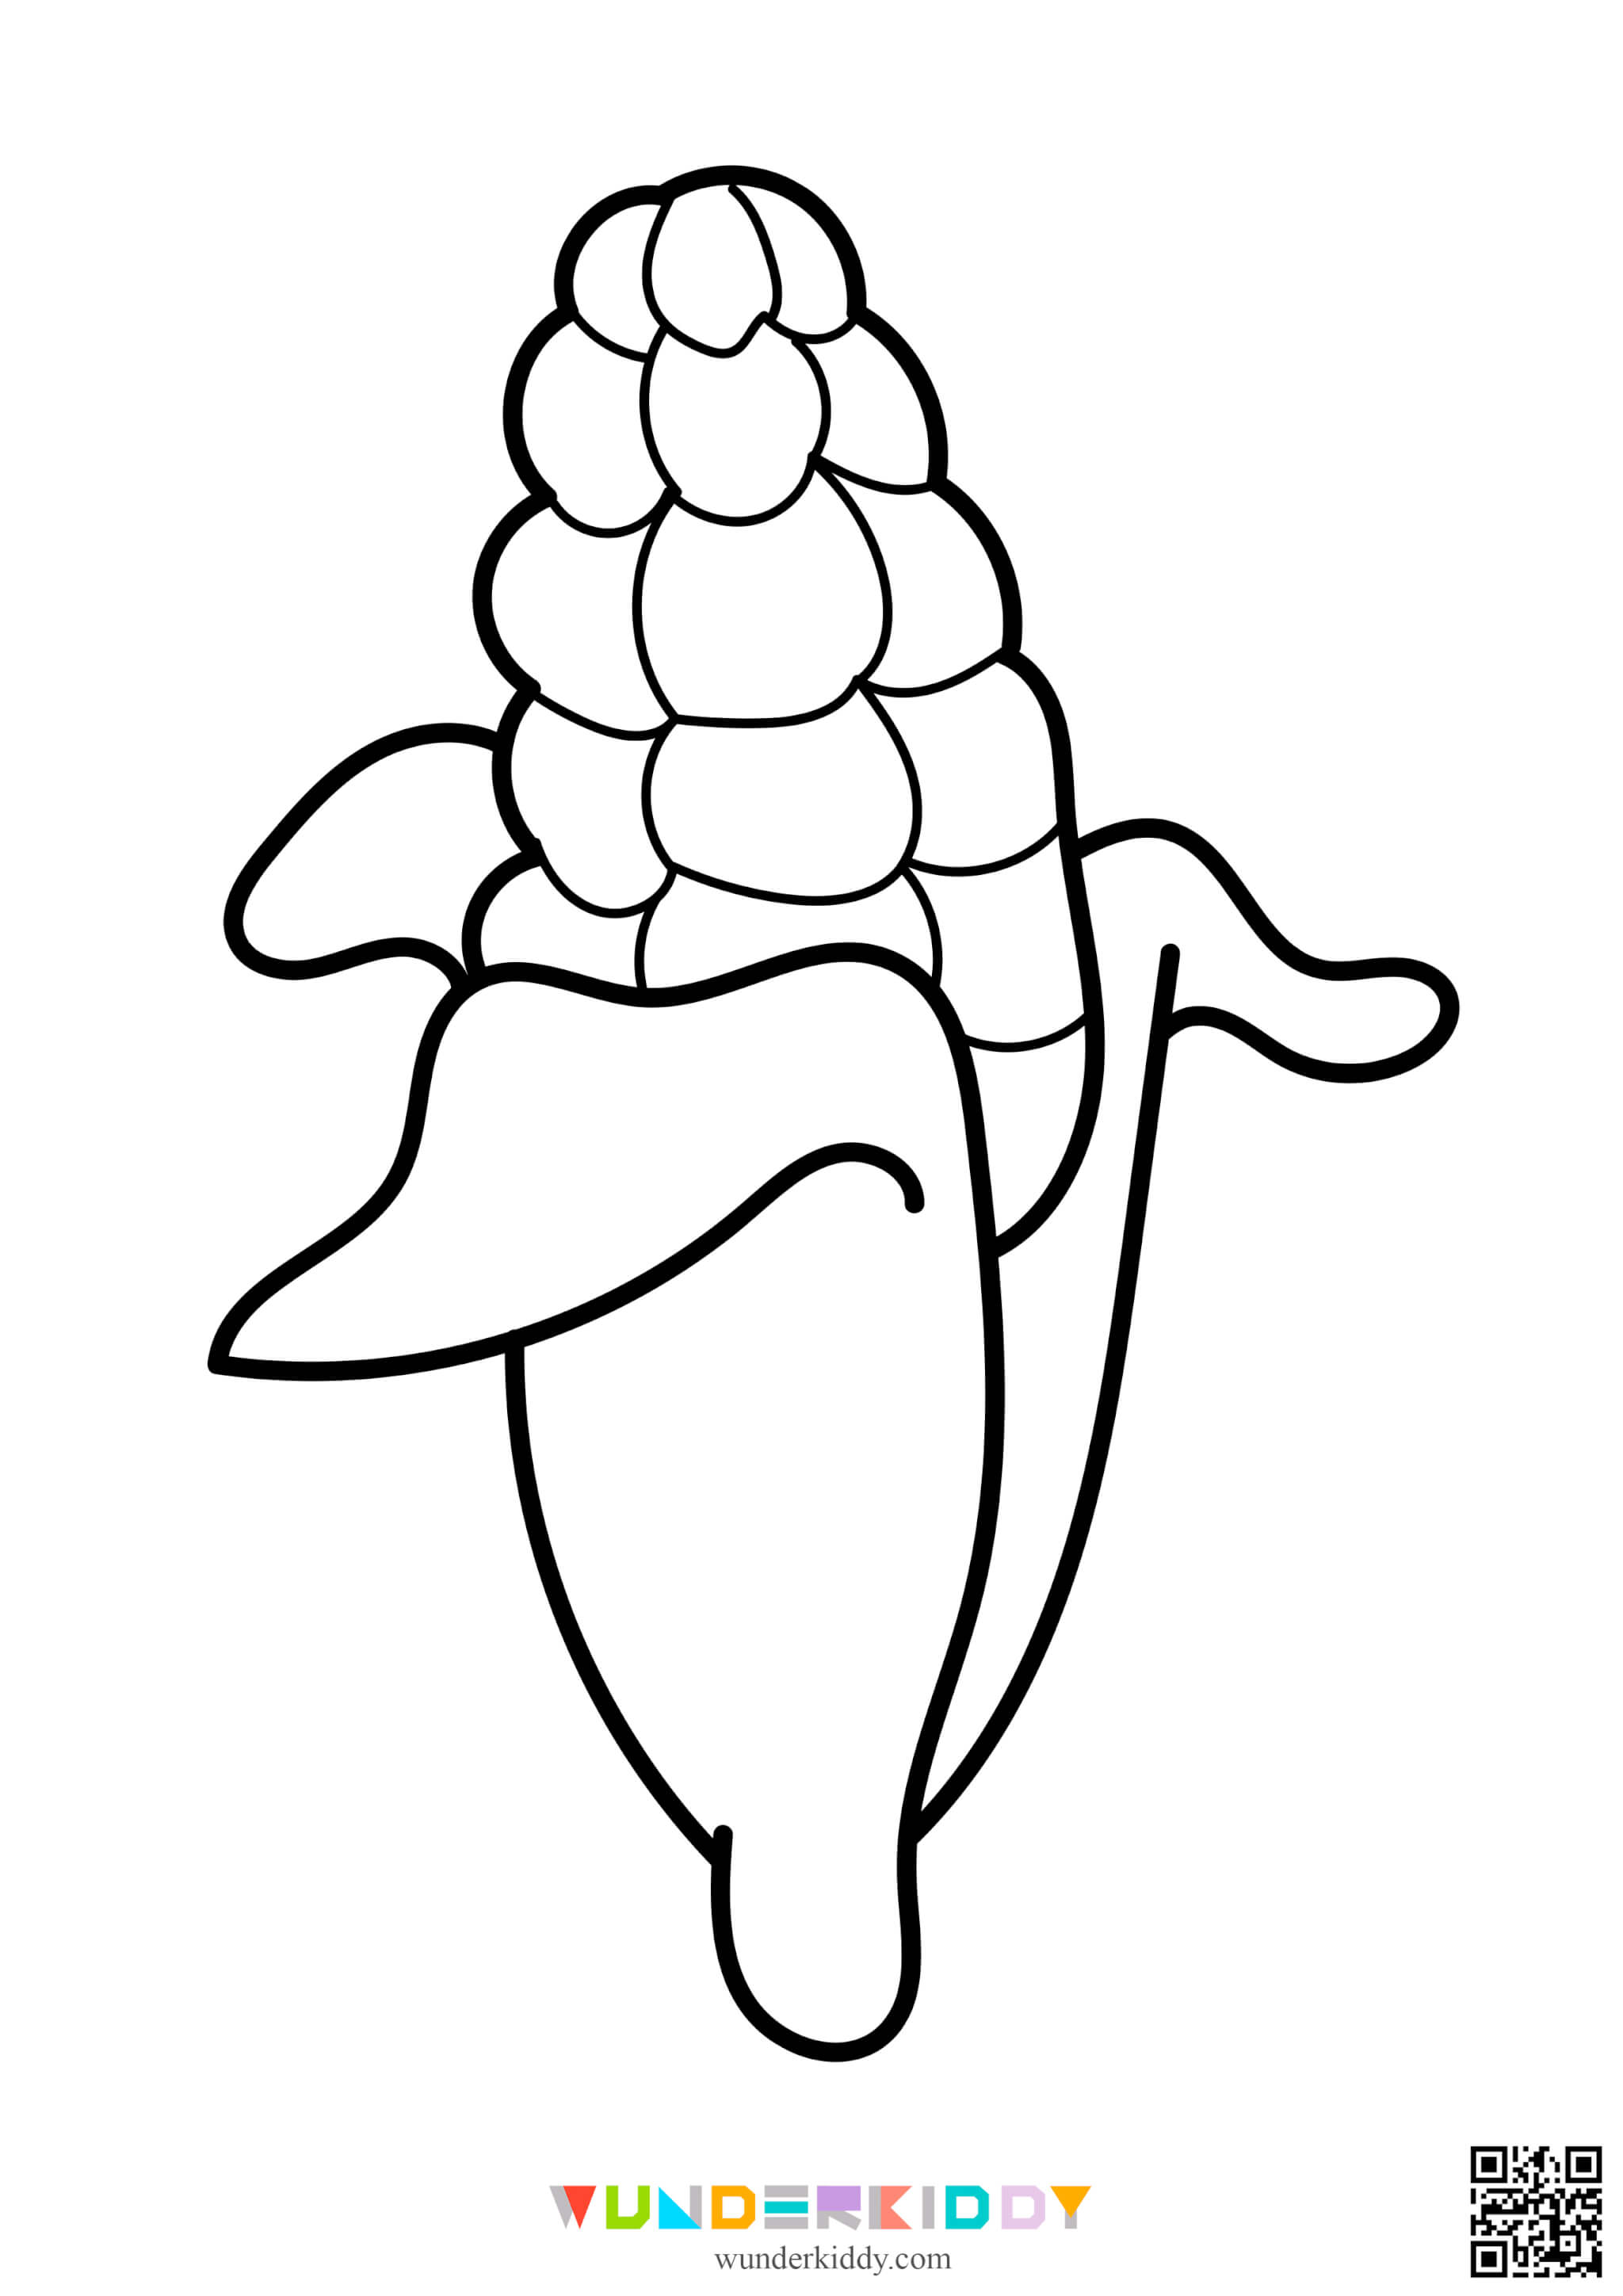 Fall Coloring Pages - Image 9